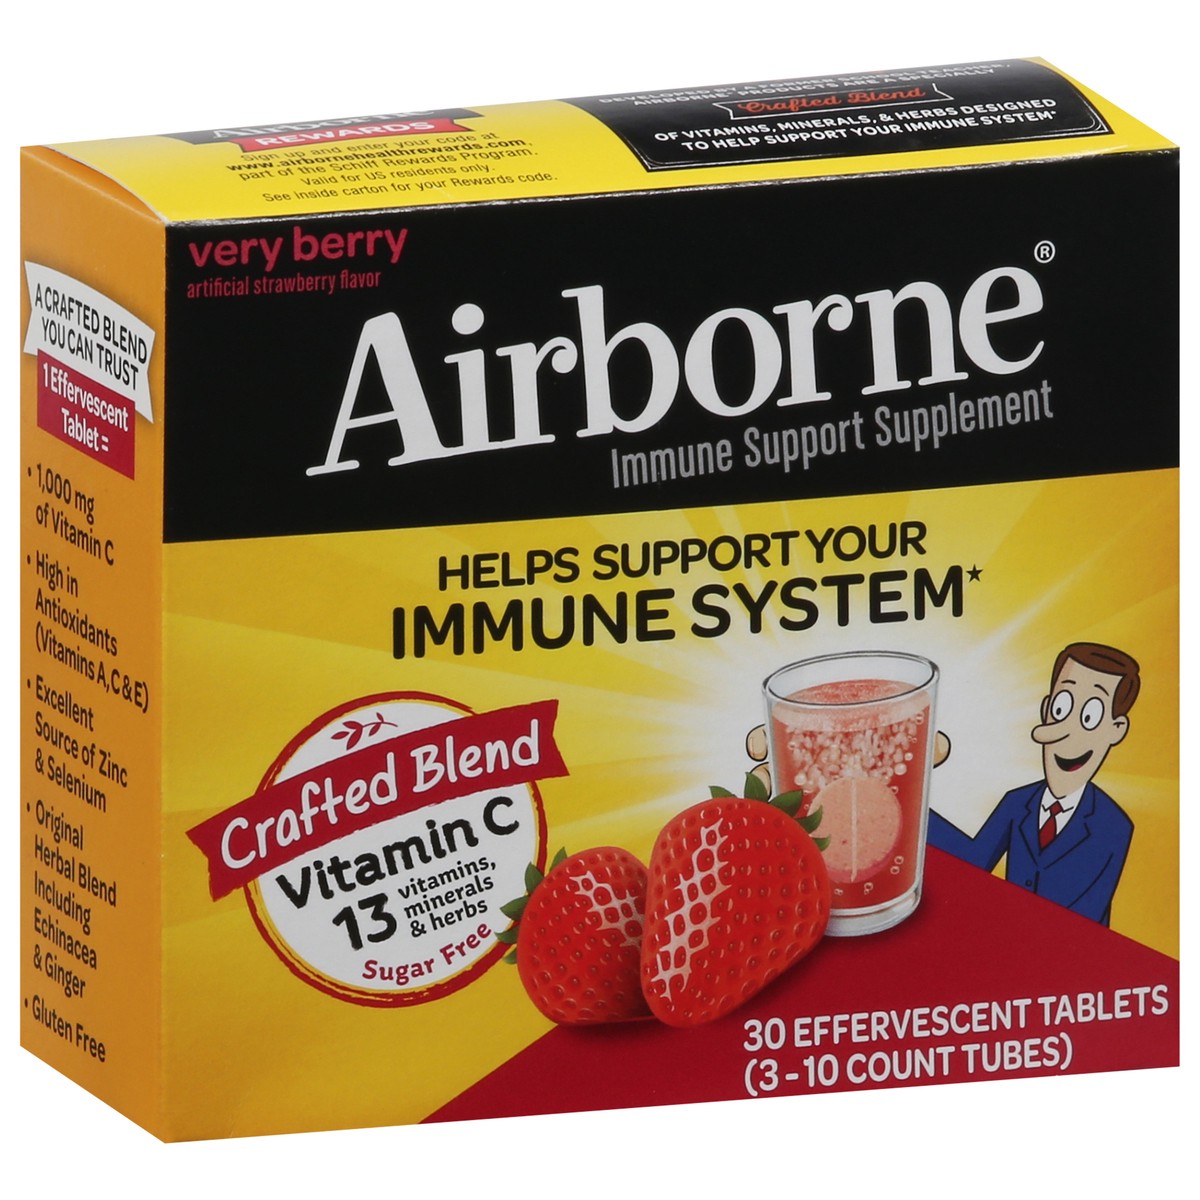 slide 8 of 14, Airborne Very Berry Effervescent Tablets, 30 count - 1000mg of Vitamin C, Immune Support Supplement, 30 ct